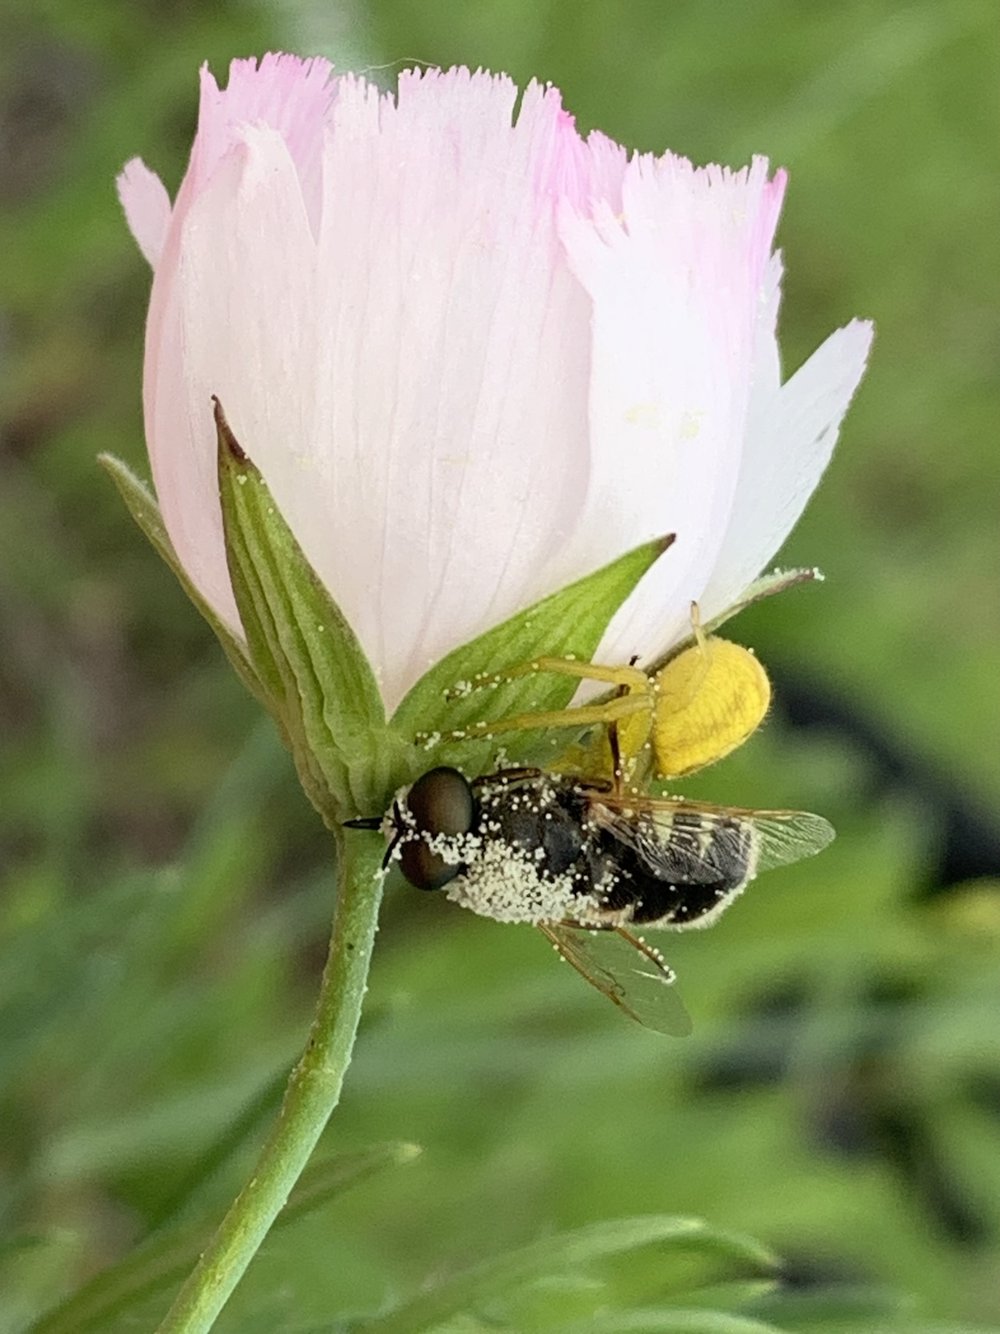   Crab Spider  consuming a  Soldier Fly.  